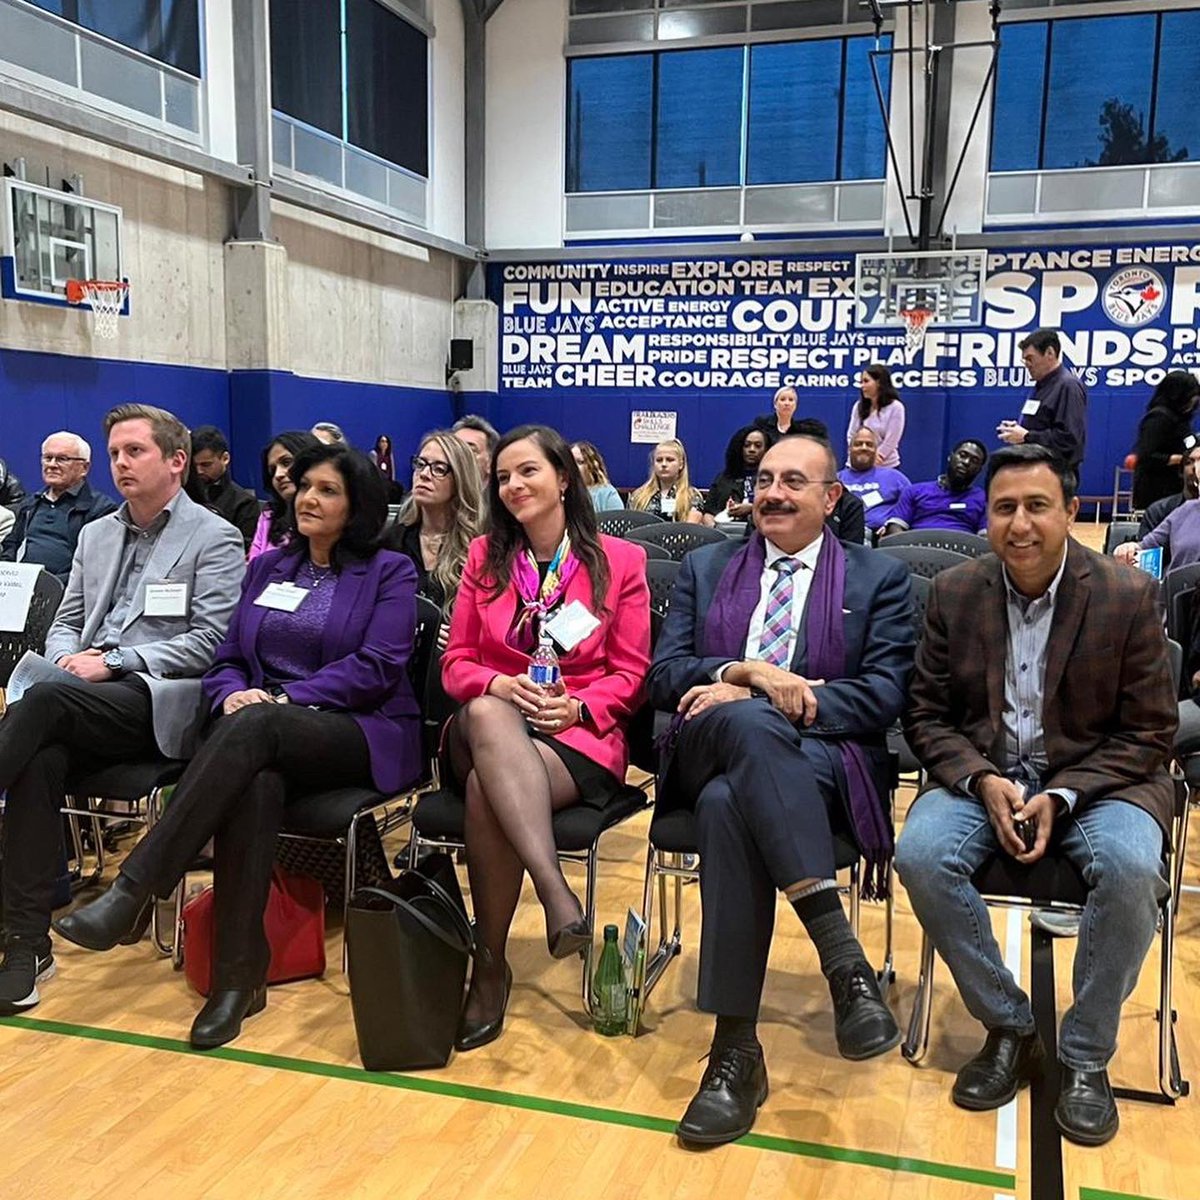 I attended the @PeelCAS reception. In October, the CAS’s across #Ontario raise awareness about the importance of supporting vulnerable children, youth & families through Dress Purple Day campaign. @PeelCAS has received 2 grants from @ONTrillium to further grow their amazing work.